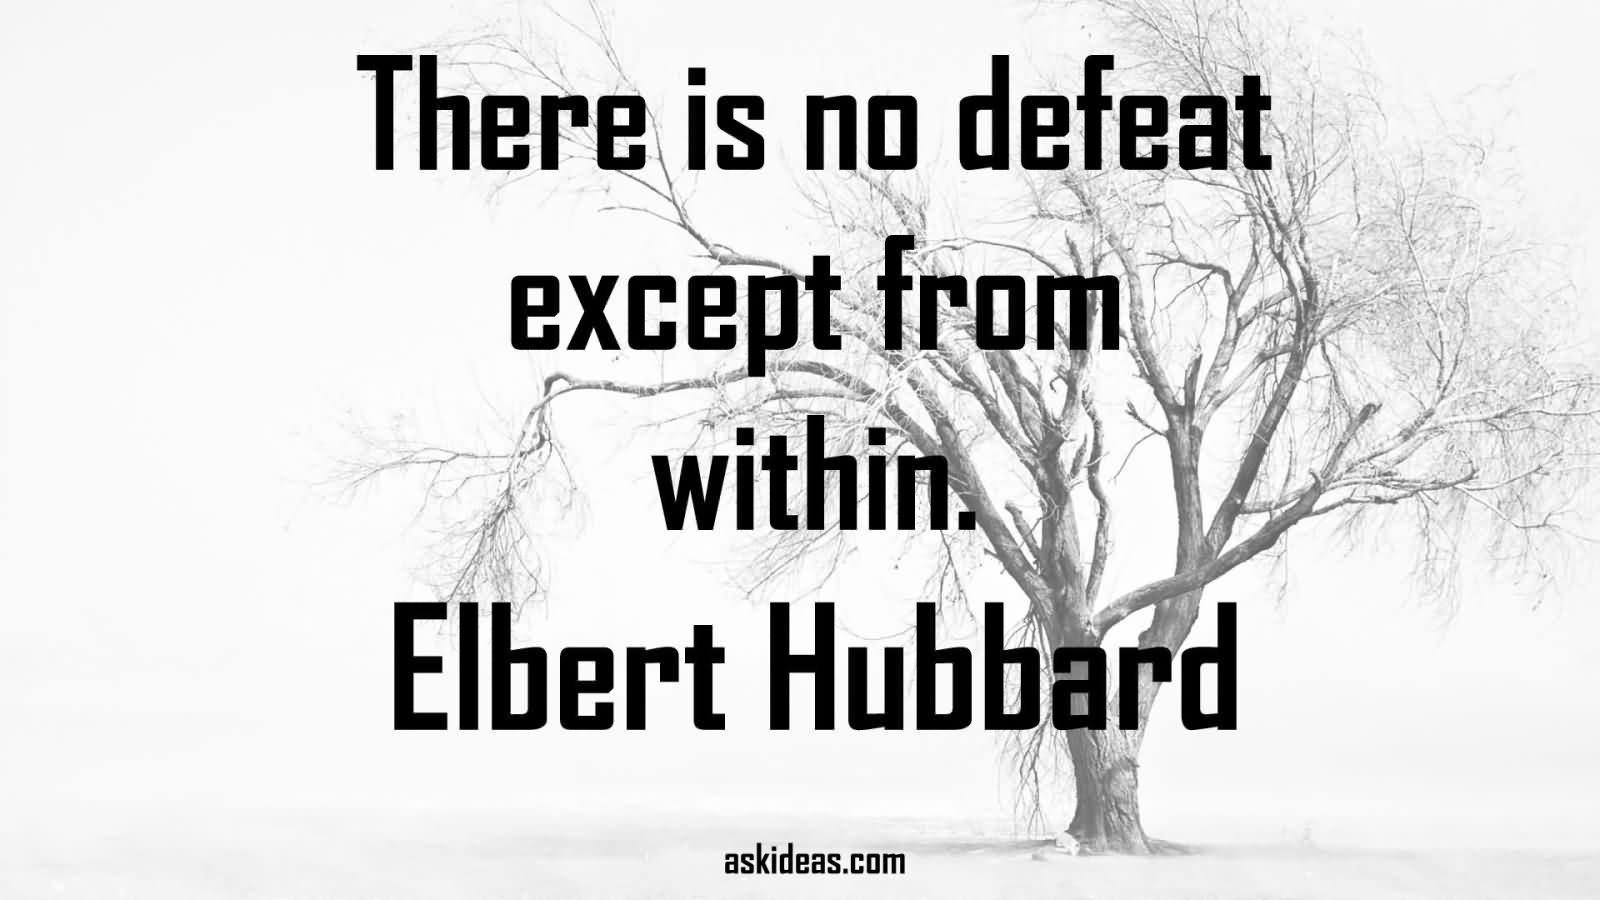 There is no defeat except from within